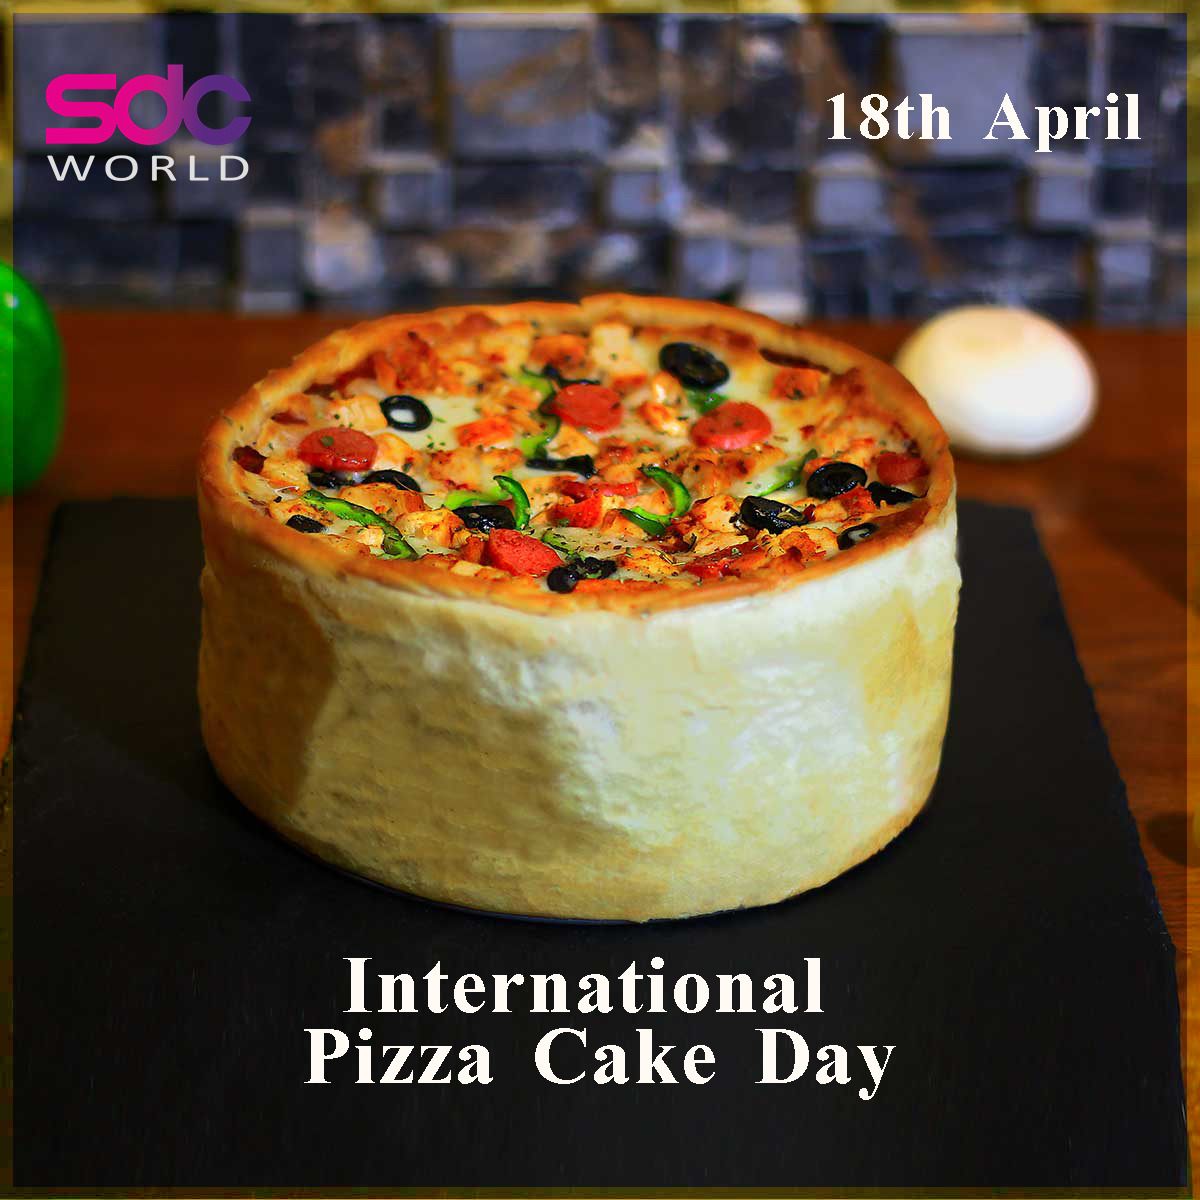 Roll up your sleeves and fire up the oven! International Pizza Cake Day is coming on April 18! 

#internationalday #pizza